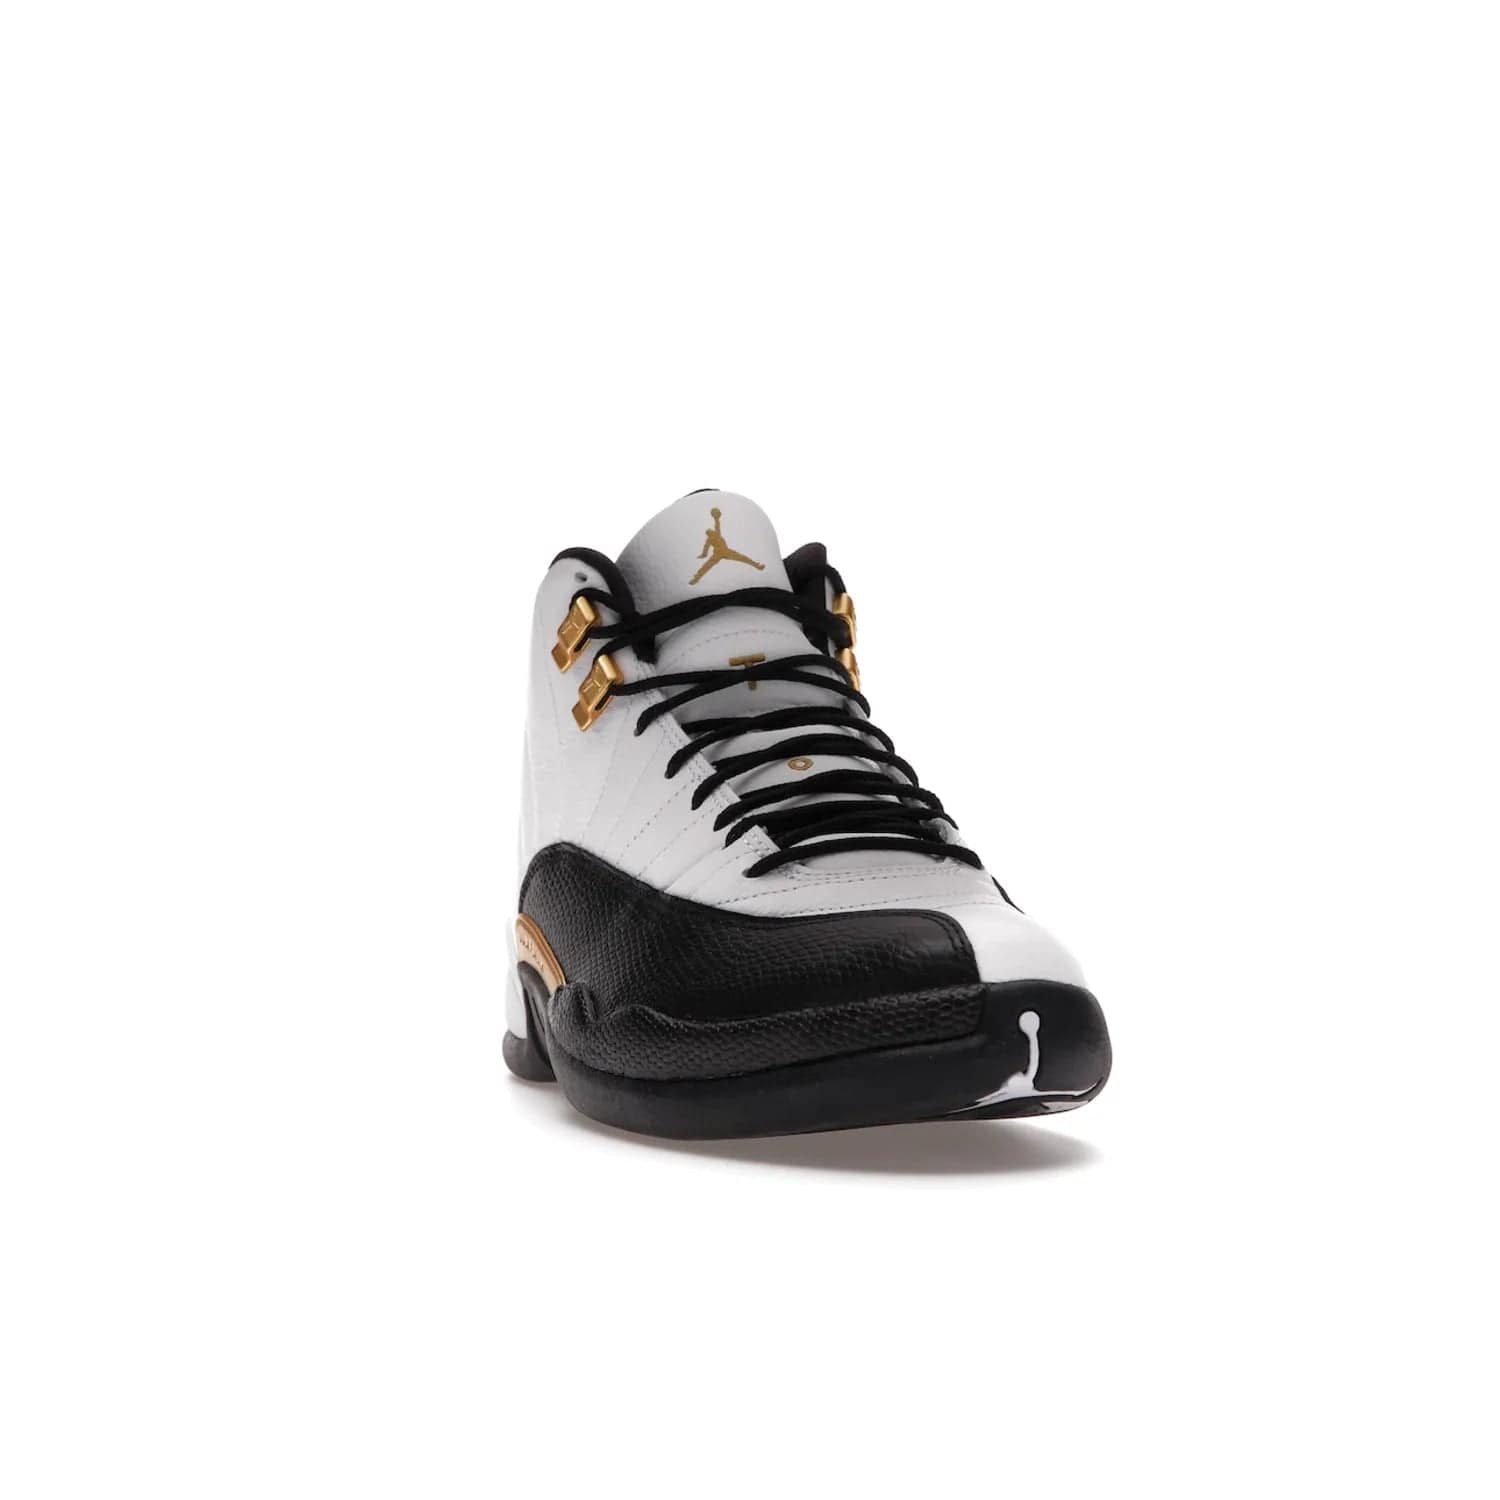 Jordan 12 Retro Royalty Taxi - Image 8 - Only at www.BallersClubKickz.com - Make a statement with the Air Jordan 12 Retro Royalty Taxi. Woven heel tag, gold plaquet, white tumbled leather upper plus a black toe wrap, make this modern take on the classic a must-have. Available in November 2021.